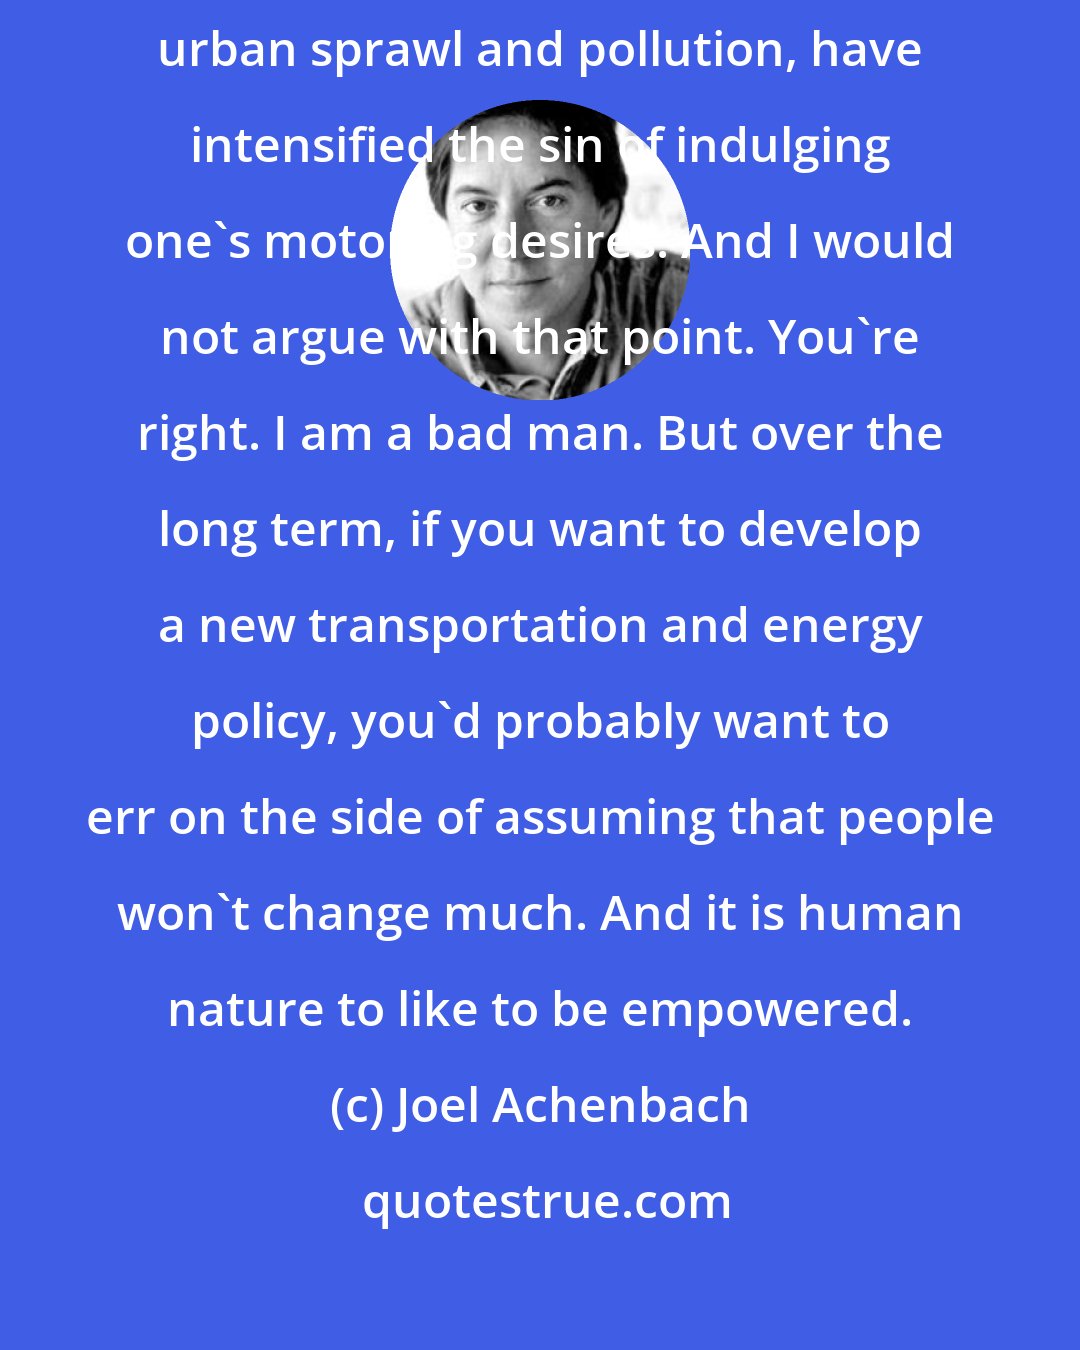 Joel Achenbach: You might declare that global warming and energy insecurity, not to mention urban sprawl and pollution, have intensified the sin of indulging one's motoring desires. And I would not argue with that point. You're right. I am a bad man. But over the long term, if you want to develop a new transportation and energy policy, you'd probably want to err on the side of assuming that people won't change much. And it is human nature to like to be empowered.